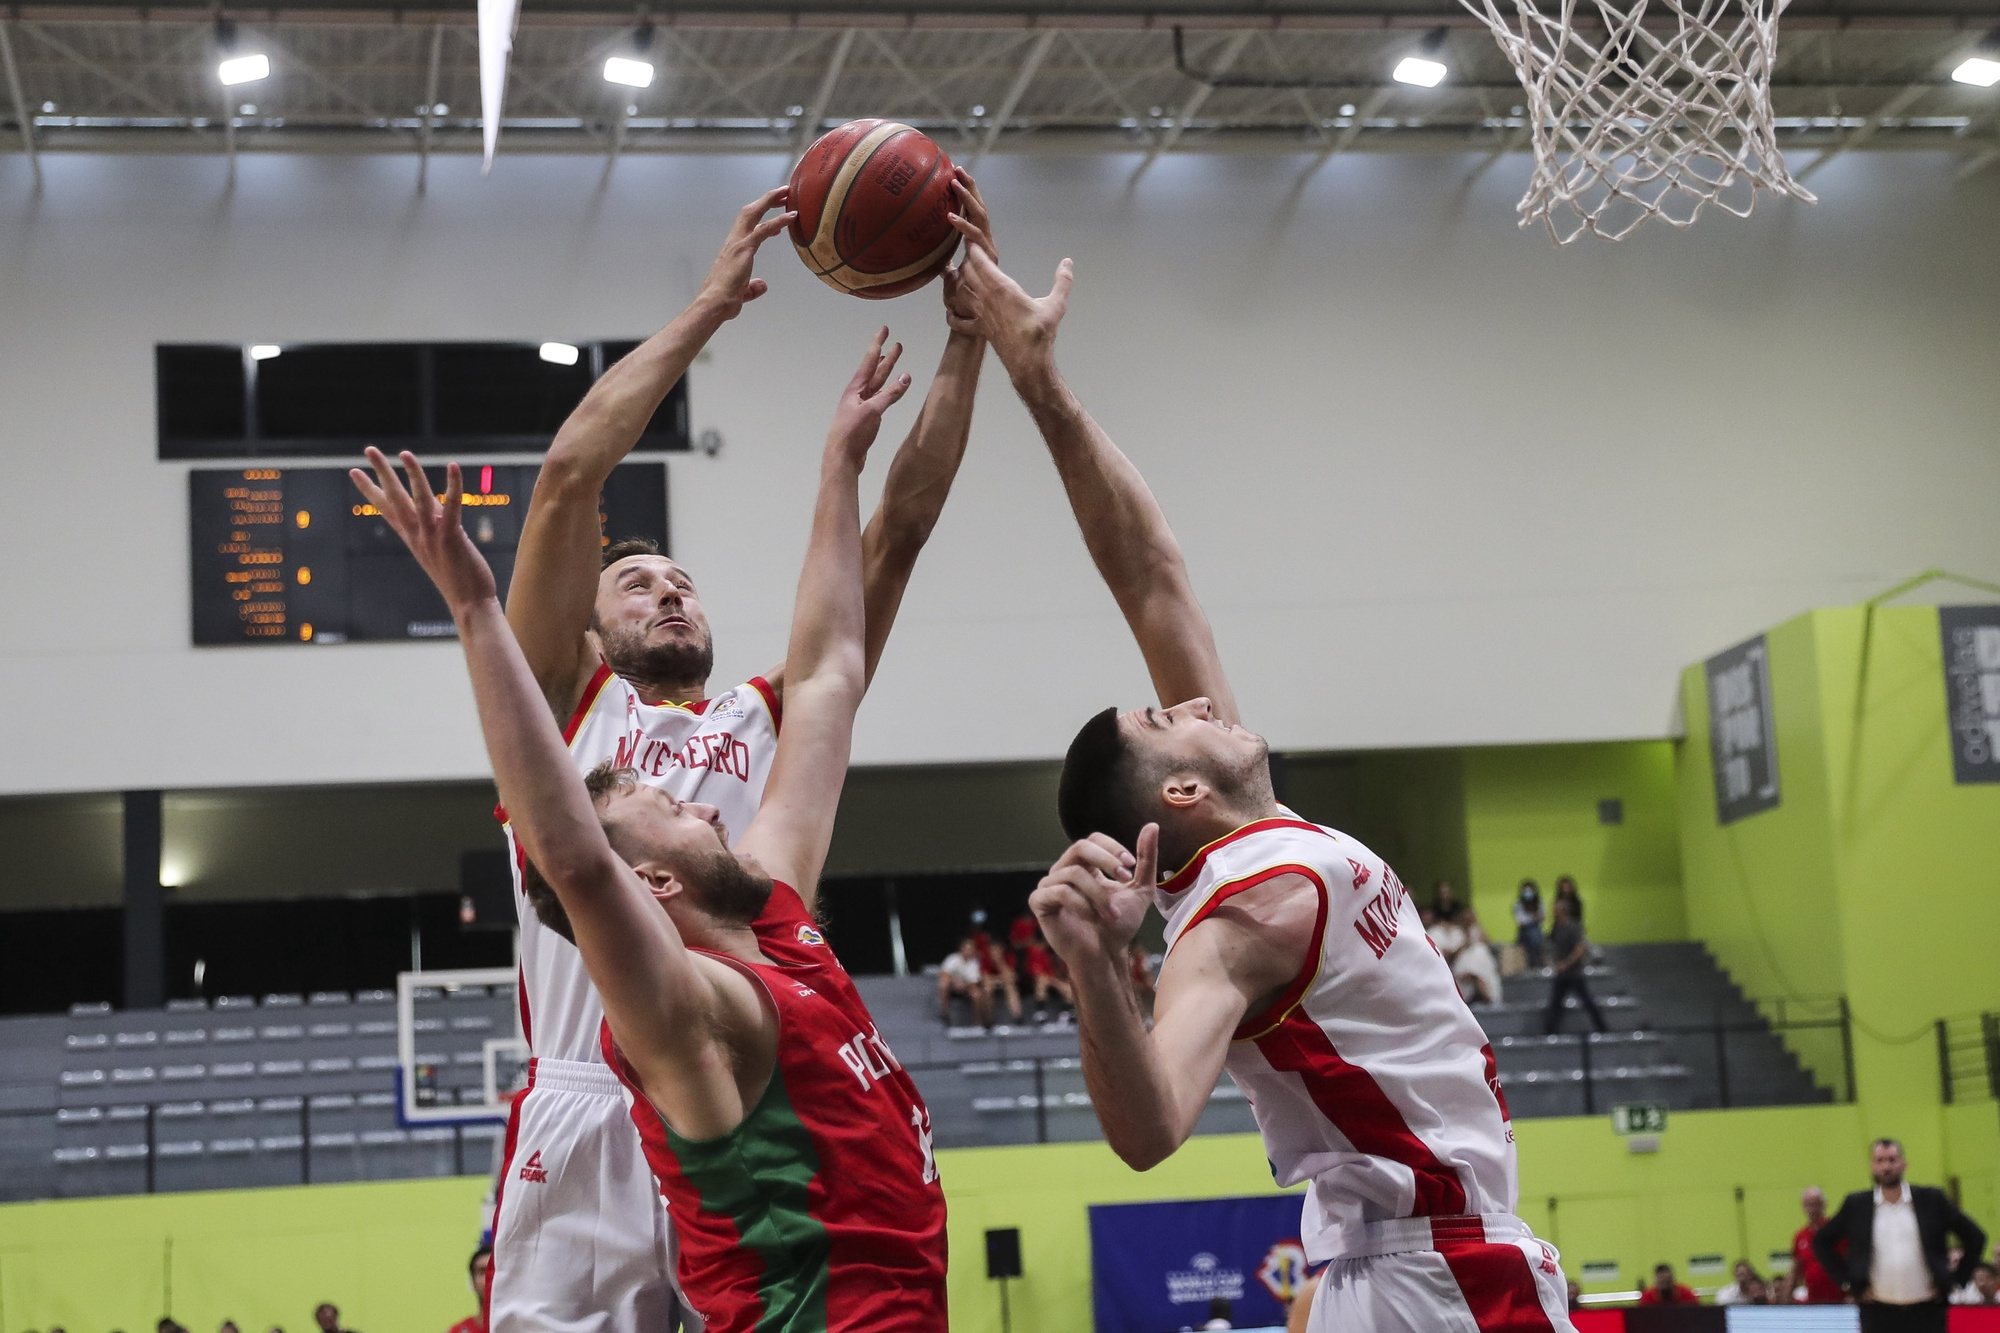 Portugal&#039;s Joao Guerreiro (C) fights for the ball with Montenegro&#039;s Aleksa Ilic (R) and Vladimir Mihailovic (L) during the FIBA Basketball World Cup 2023 Qualifier group E match at Odivelas Pavilion, outskirts Lisbon, Portugal, 4 of July 2022. MIGUEL A. LOPES/LUSA